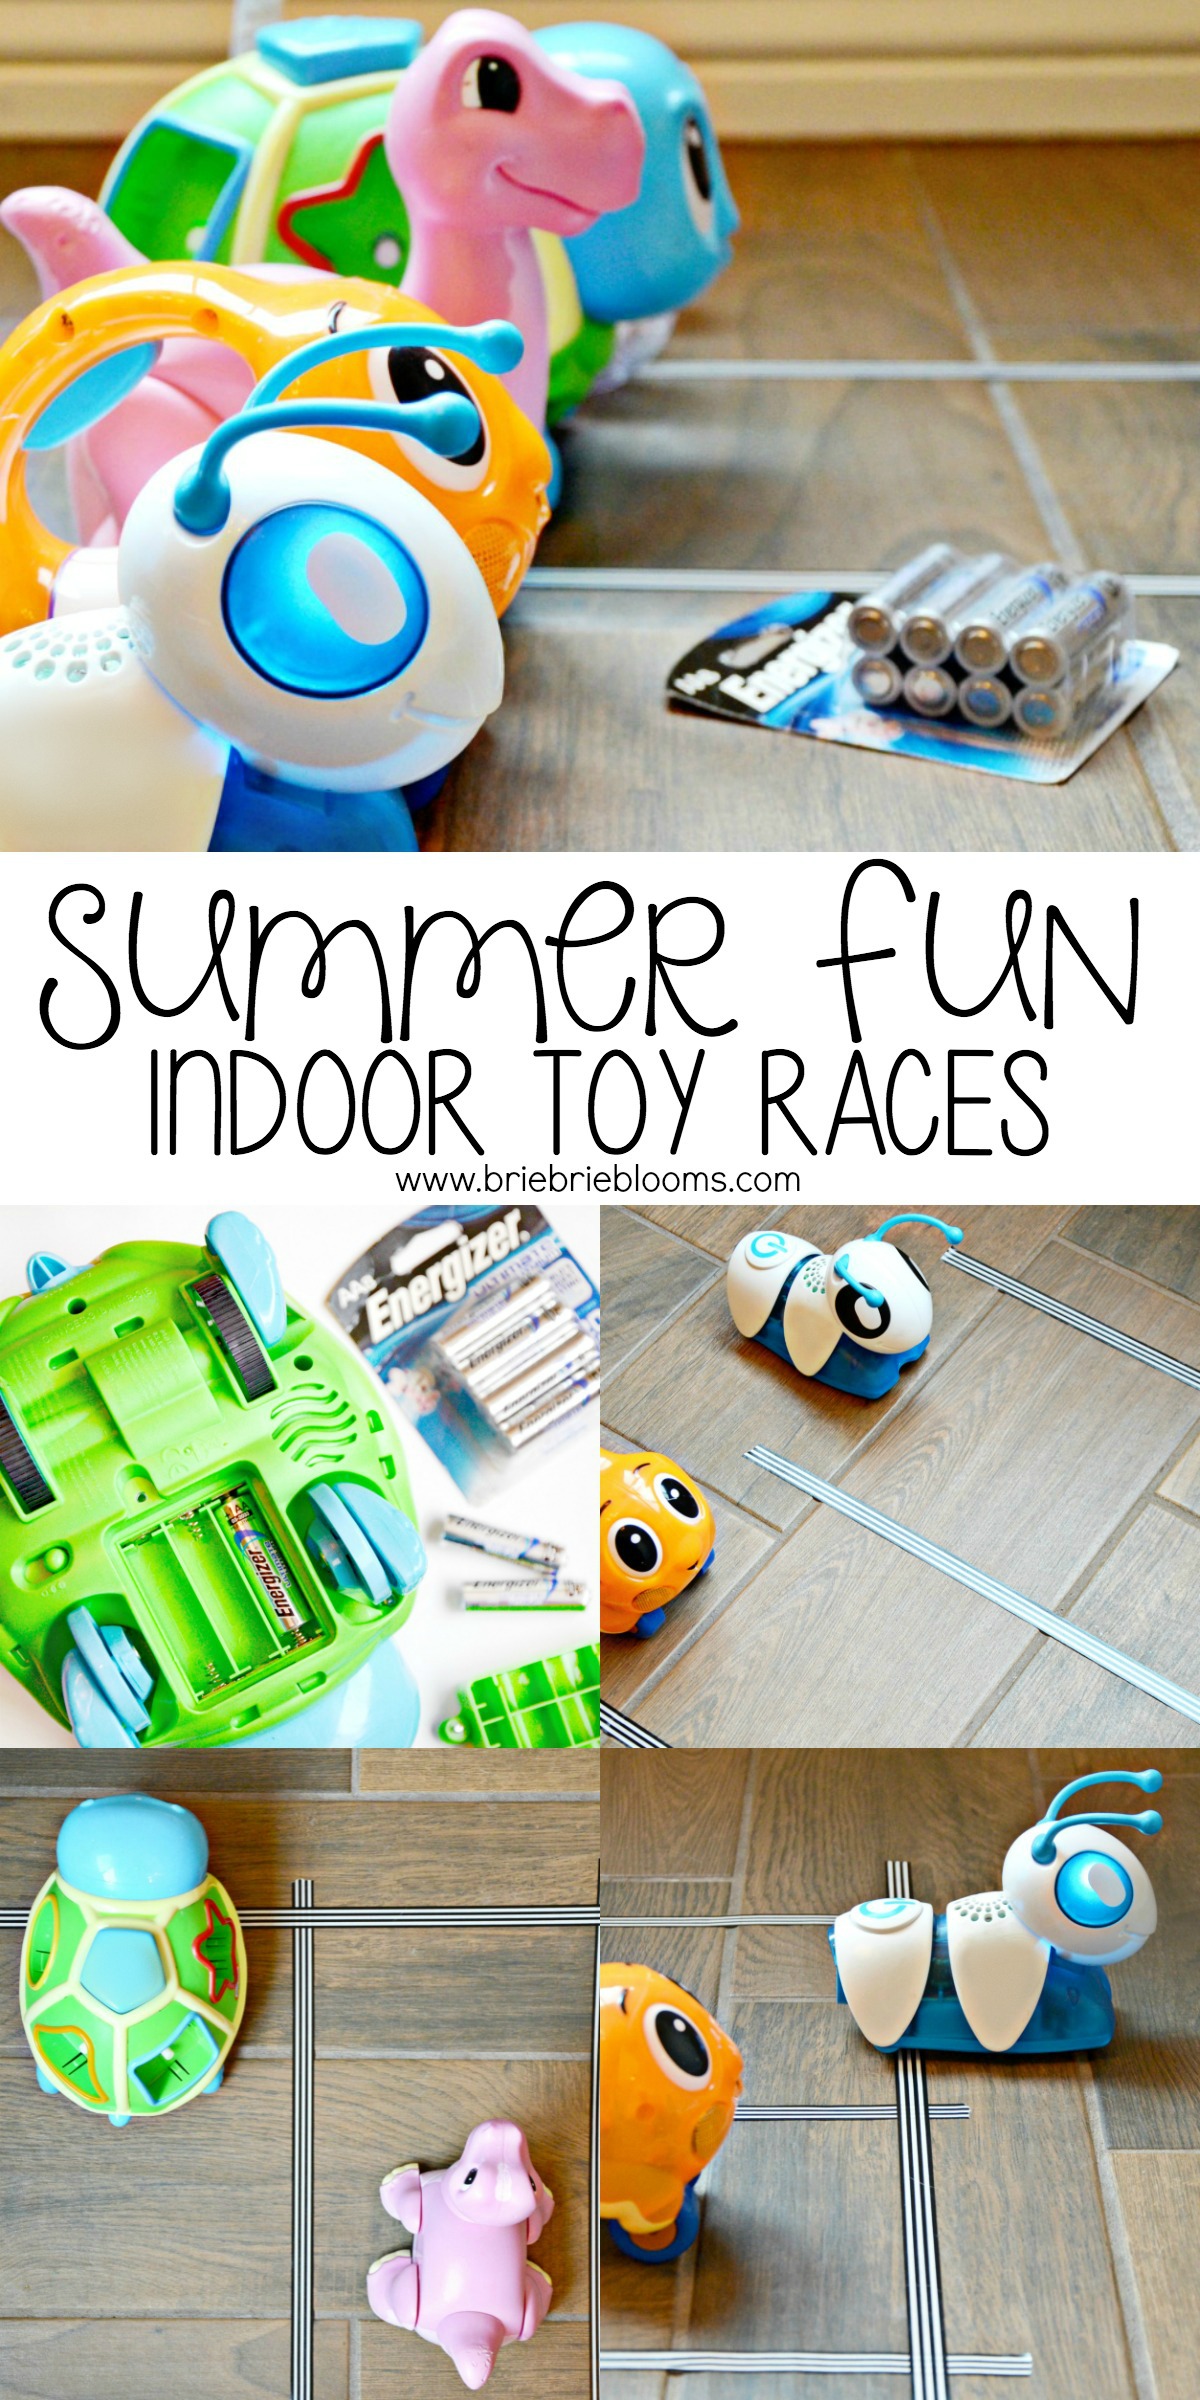 Have summer fun with indoor toy races. Change the batteries and watch your children play with toys from home.